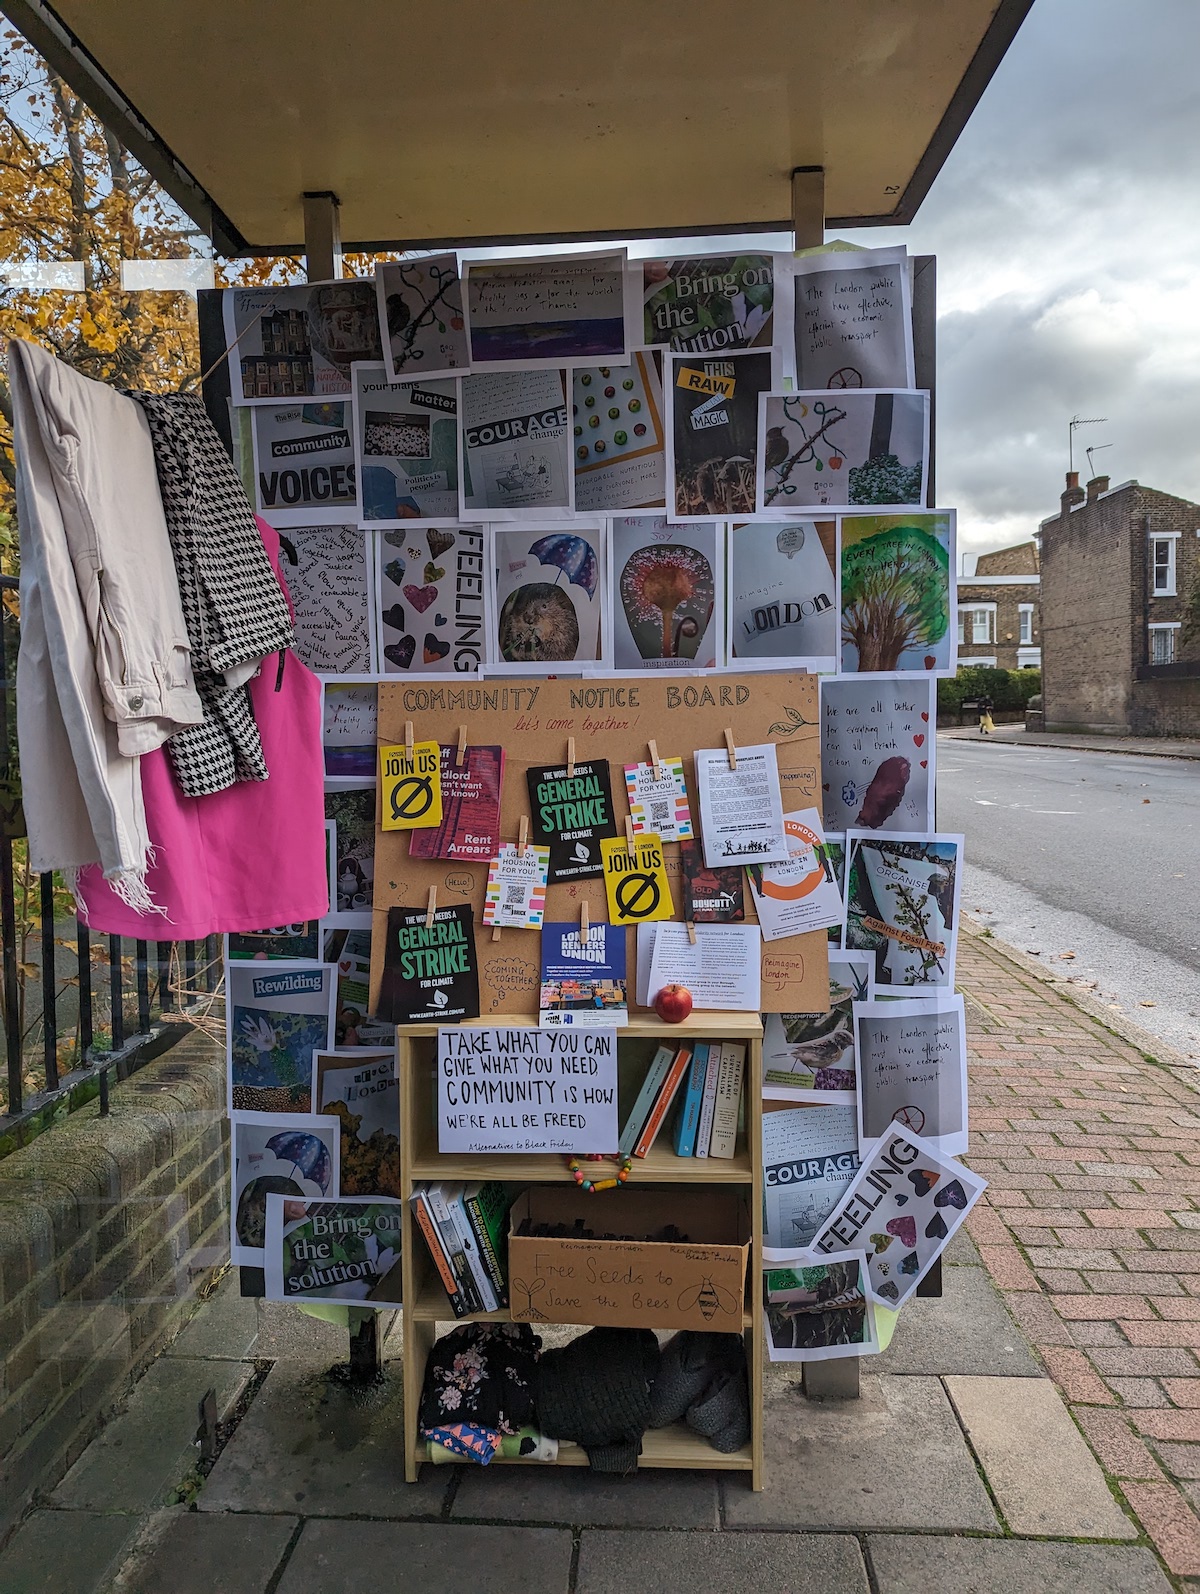 a bus stop covered with printed images of different things. In the middle on the ground is a bookcase with a sign reading "Take what you can. Give what you need. Community is how we're all be freed"